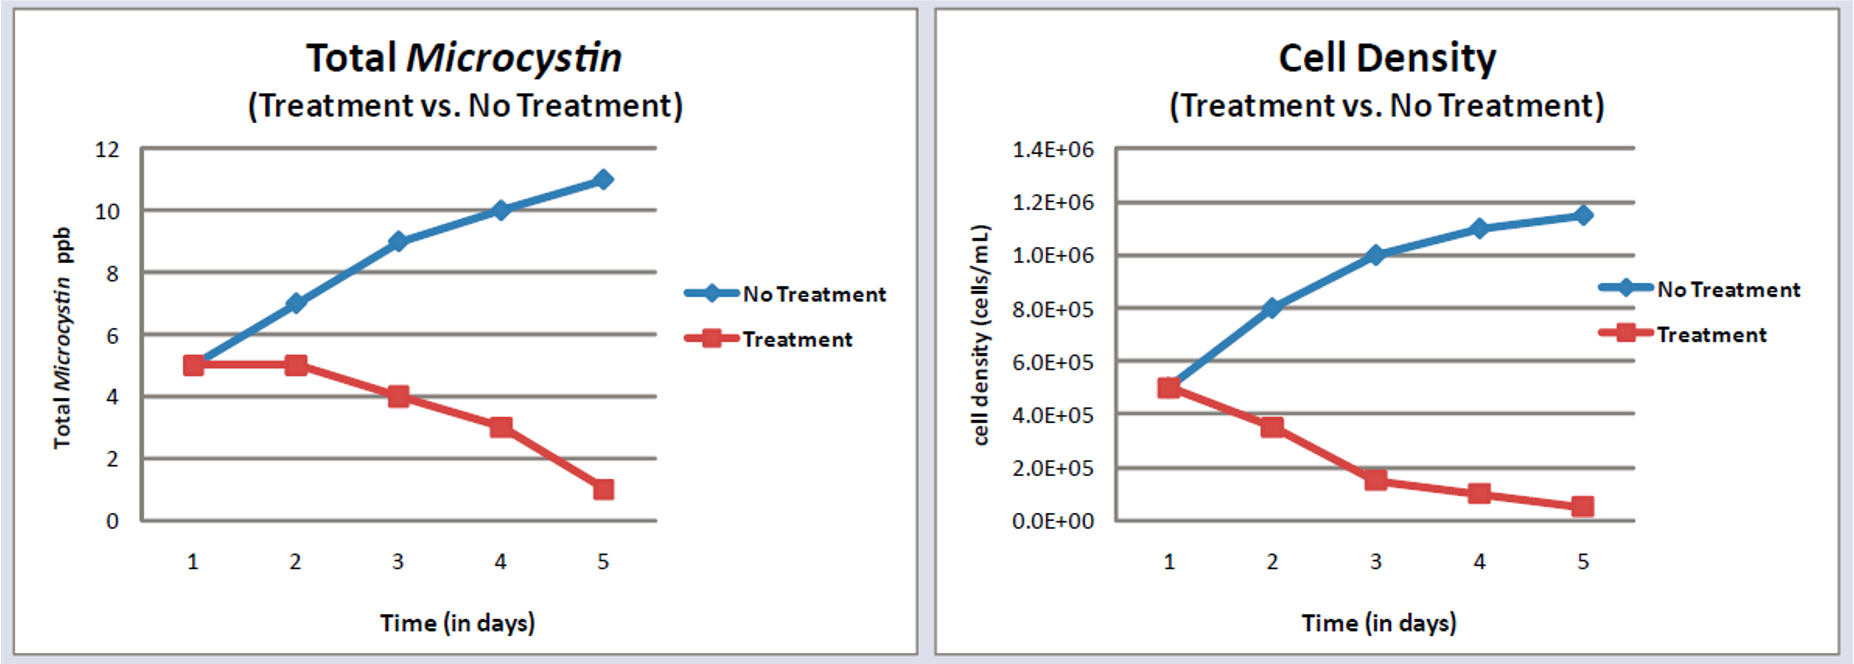 Graph showing microcystin concentrations and cell density after treatment versus no treatment